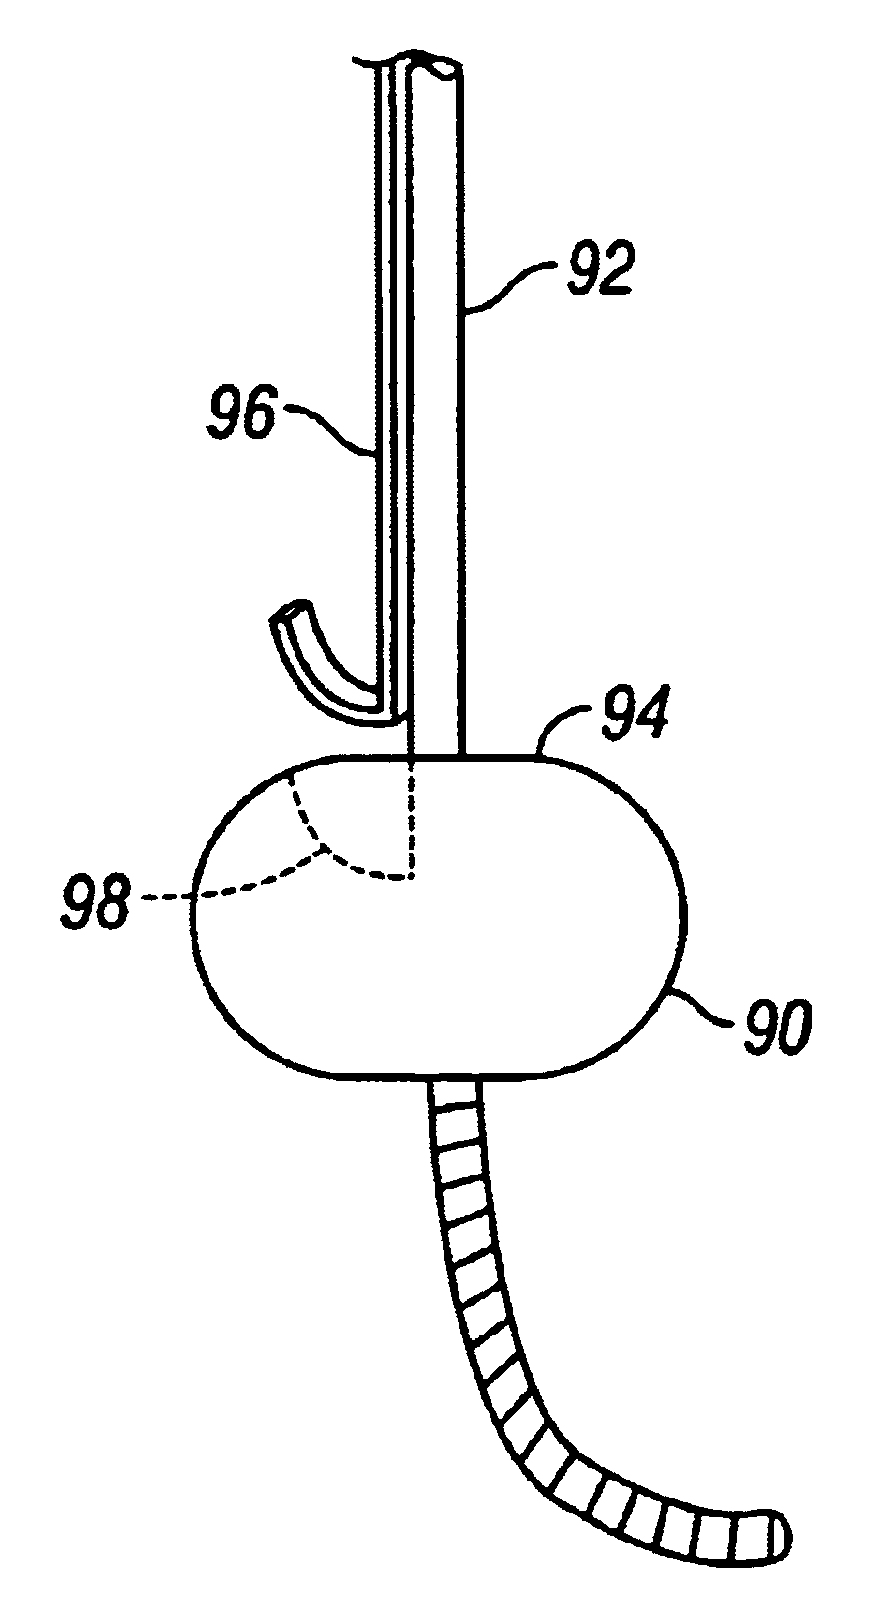 Methods and apparatus for forming anastomotic sites